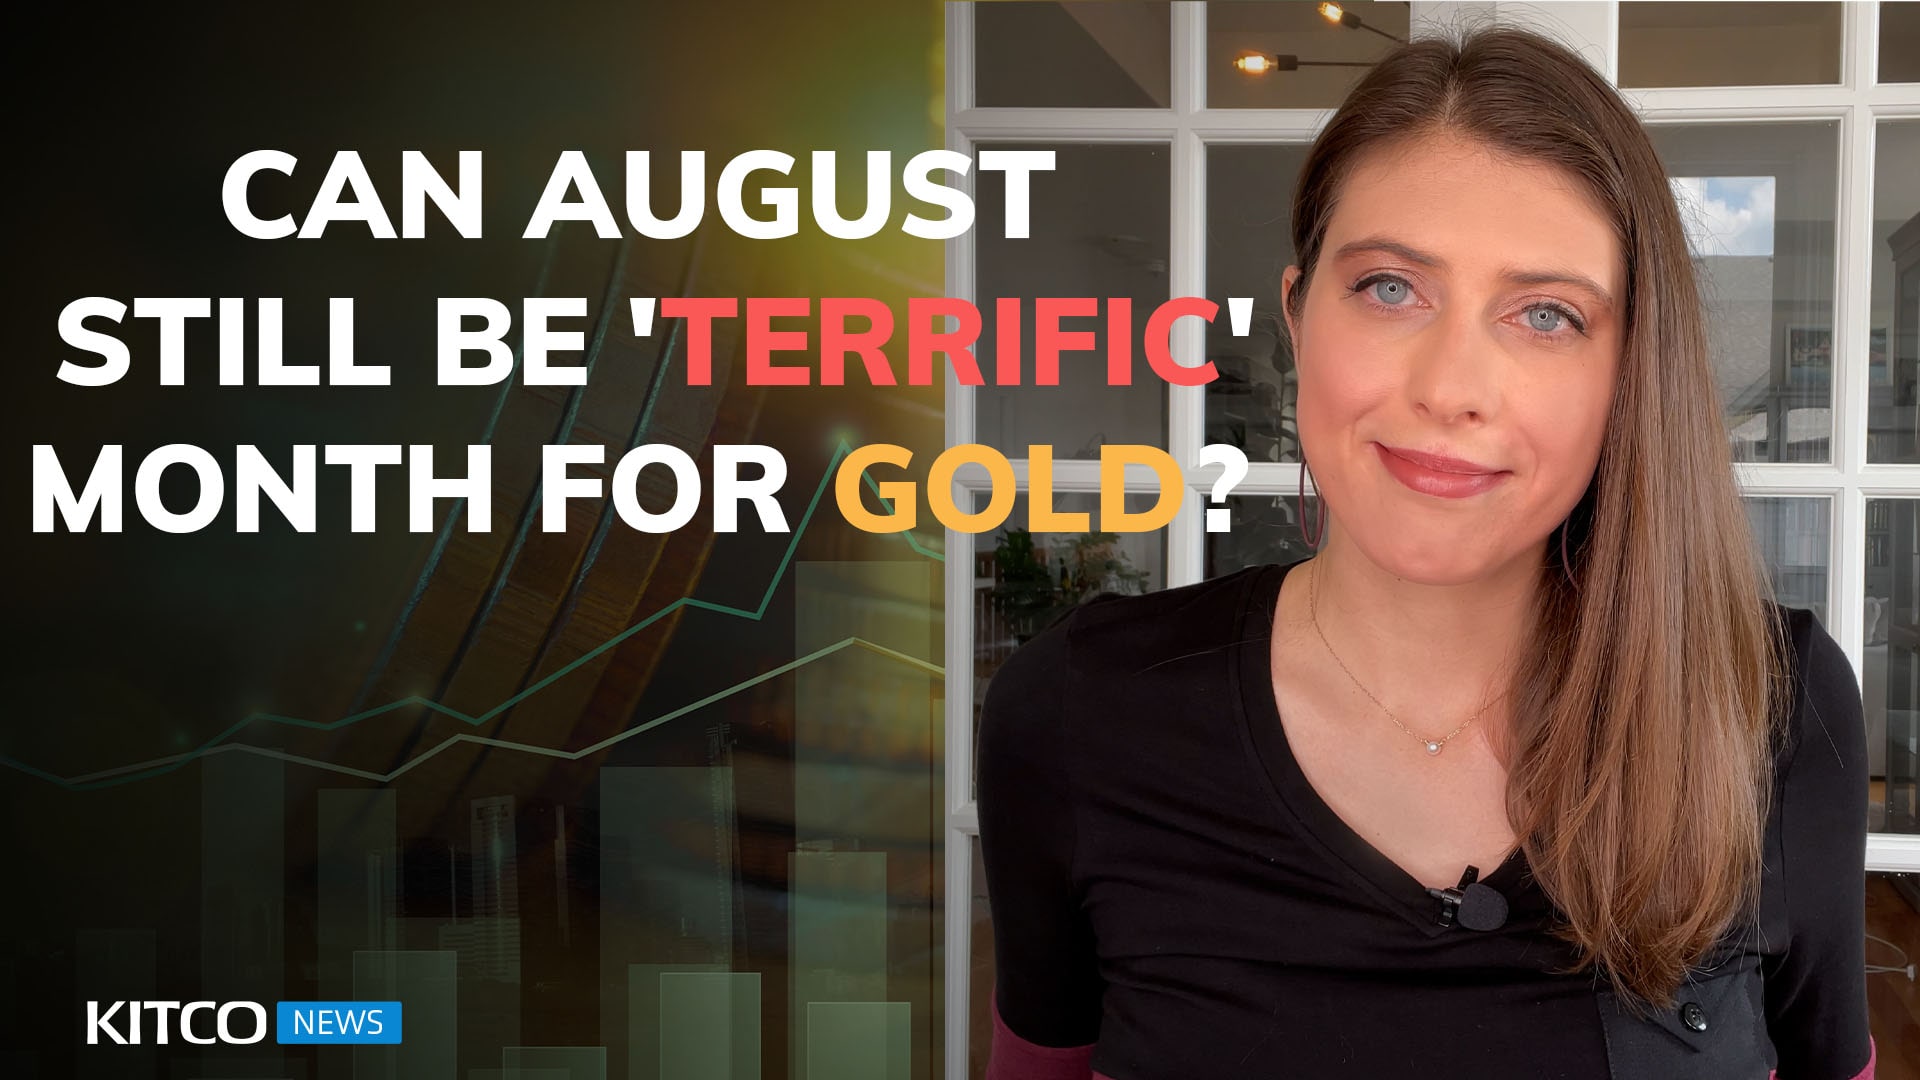 Already down $50, but August could still be ‘terrific’ month for gold